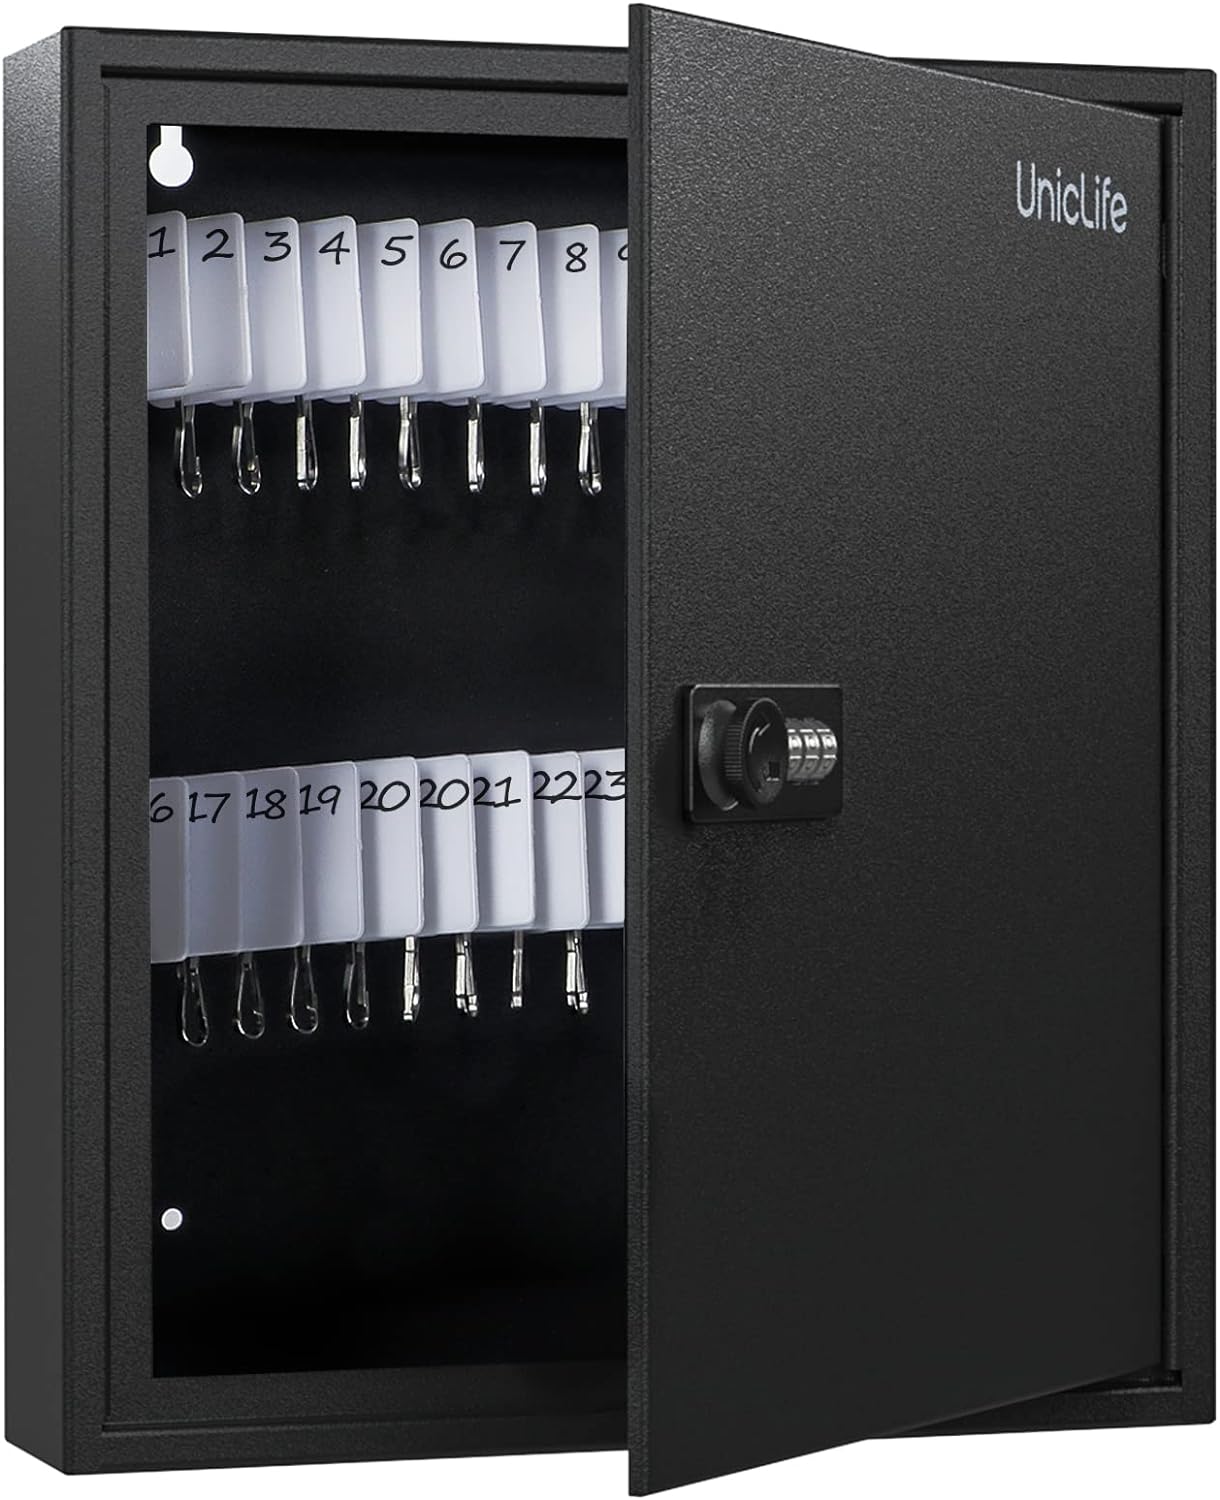 Uniclife 60-Key Slotted Key Cabinet with Combination Lock Wall Mounted Steel Key Organizer with Resettable Code Black Digital Security B